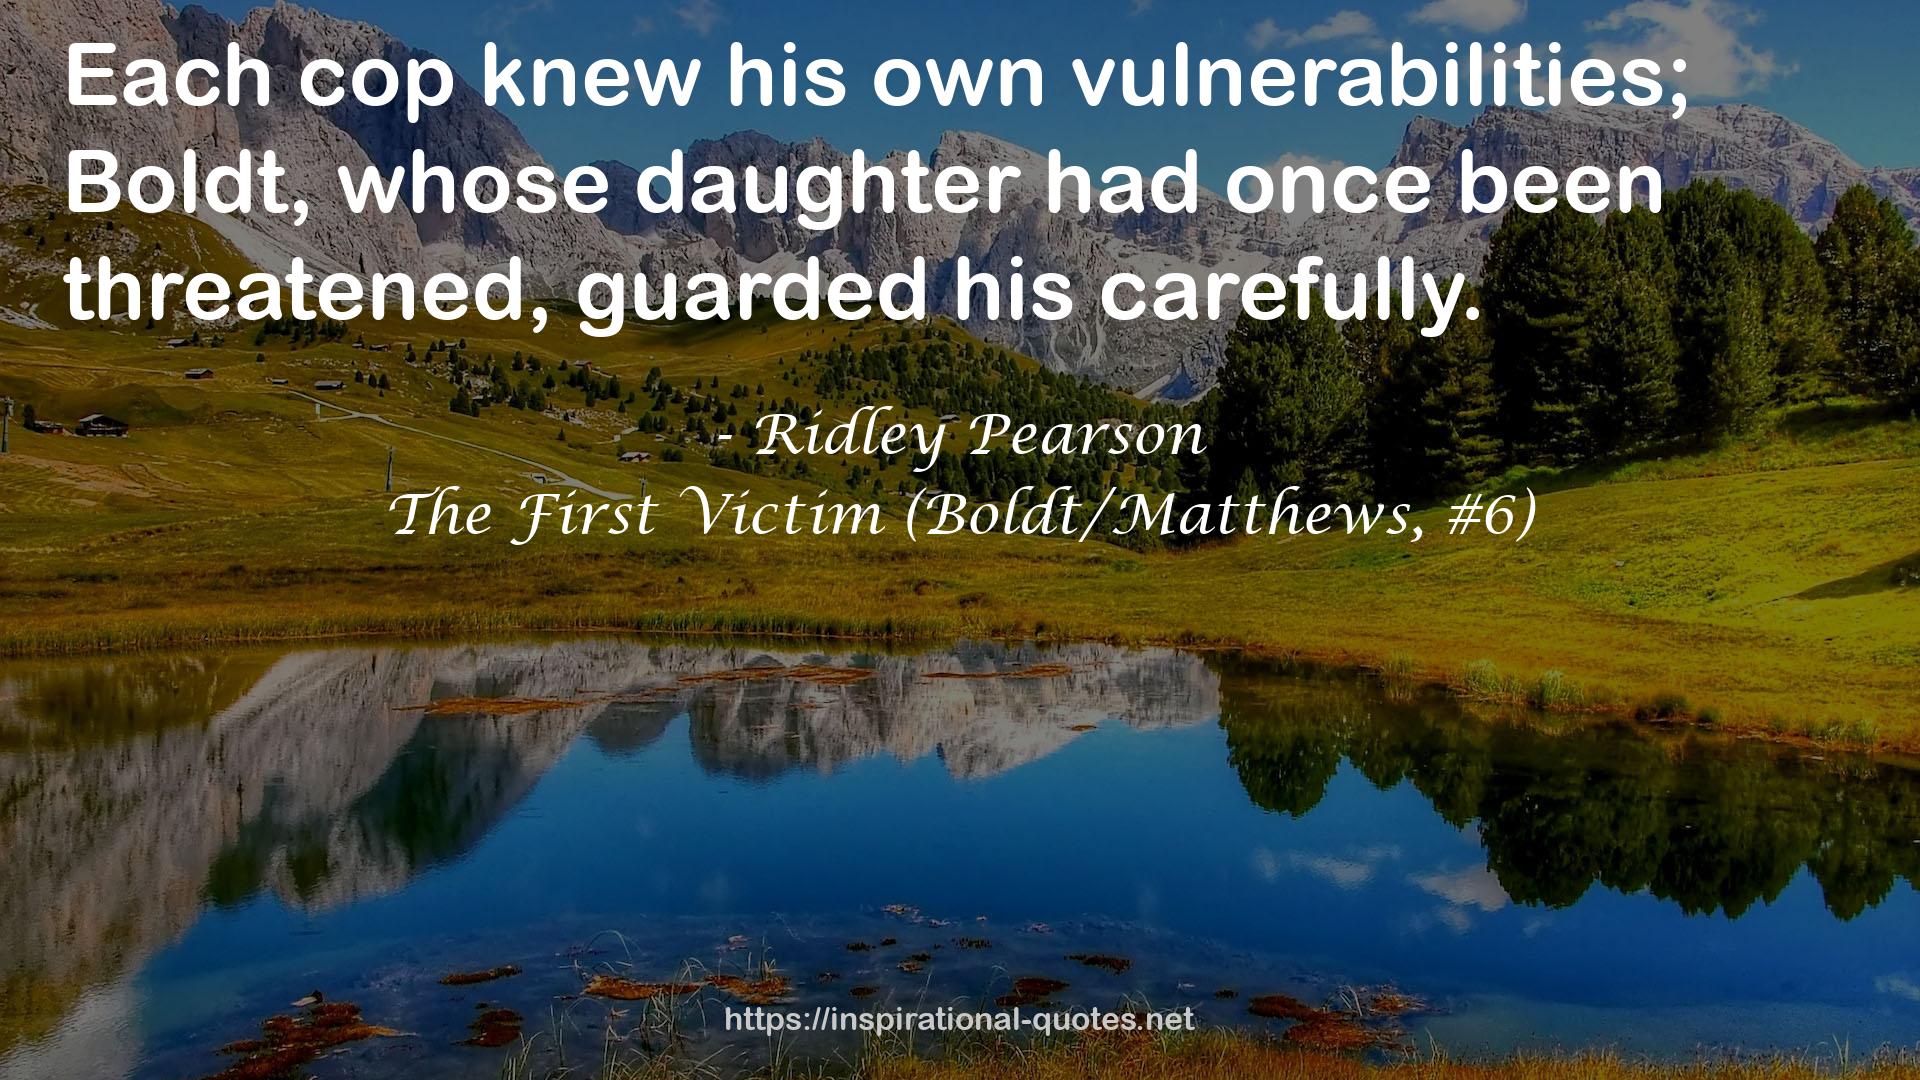 The First Victim (Boldt/Matthews, #6) QUOTES